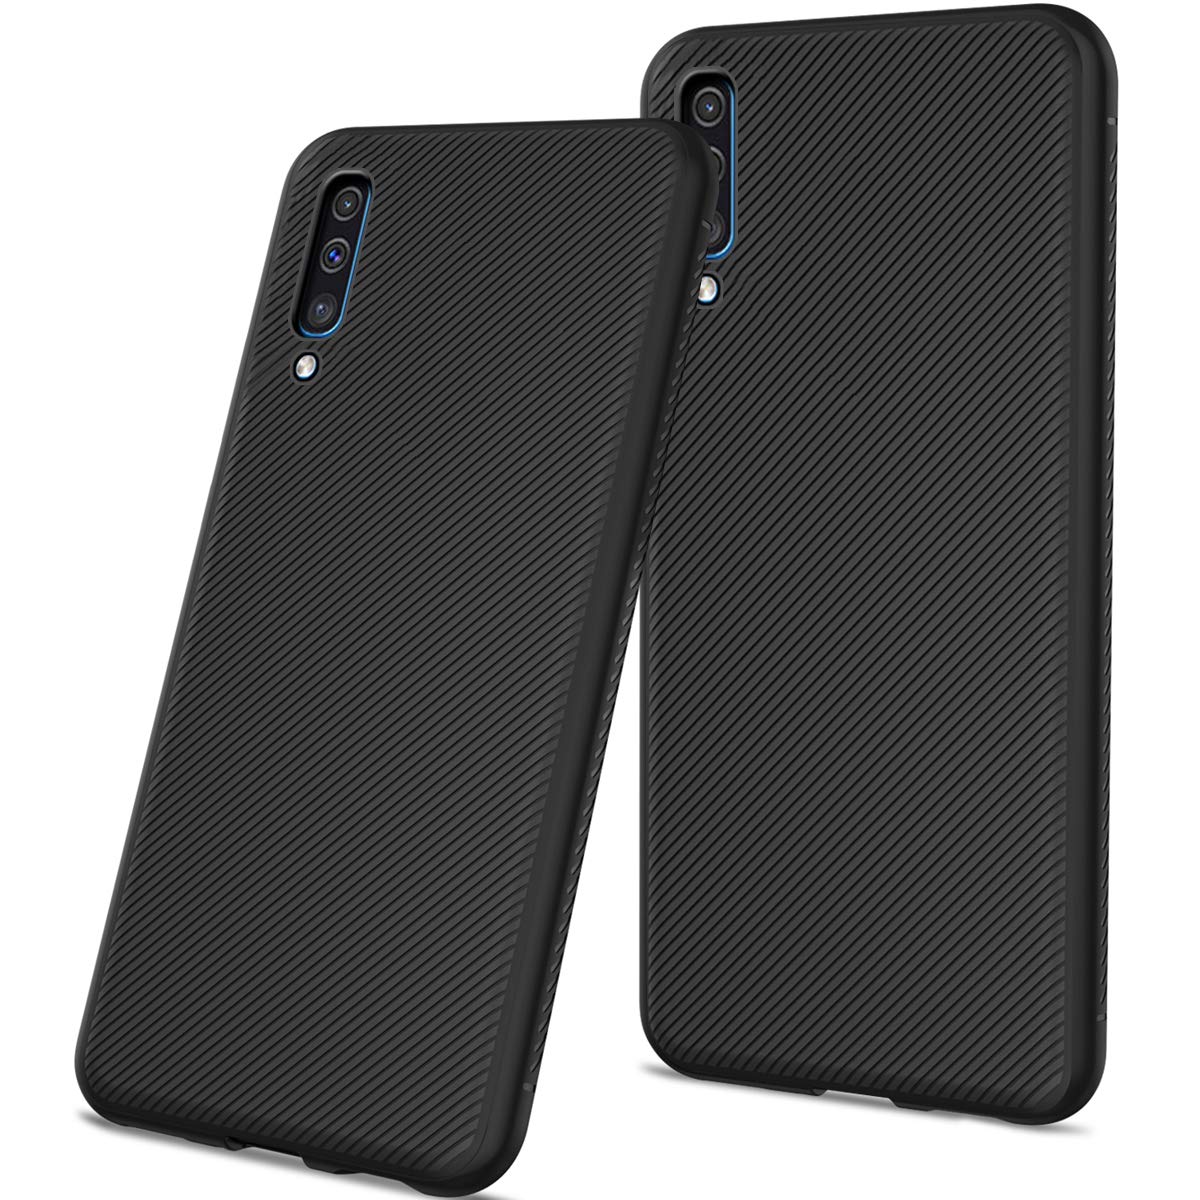 Bakeey Carbon Fiber Protective Case For Samsung Galaxy A50 2019 Shockproof Soft TPU Back Cover